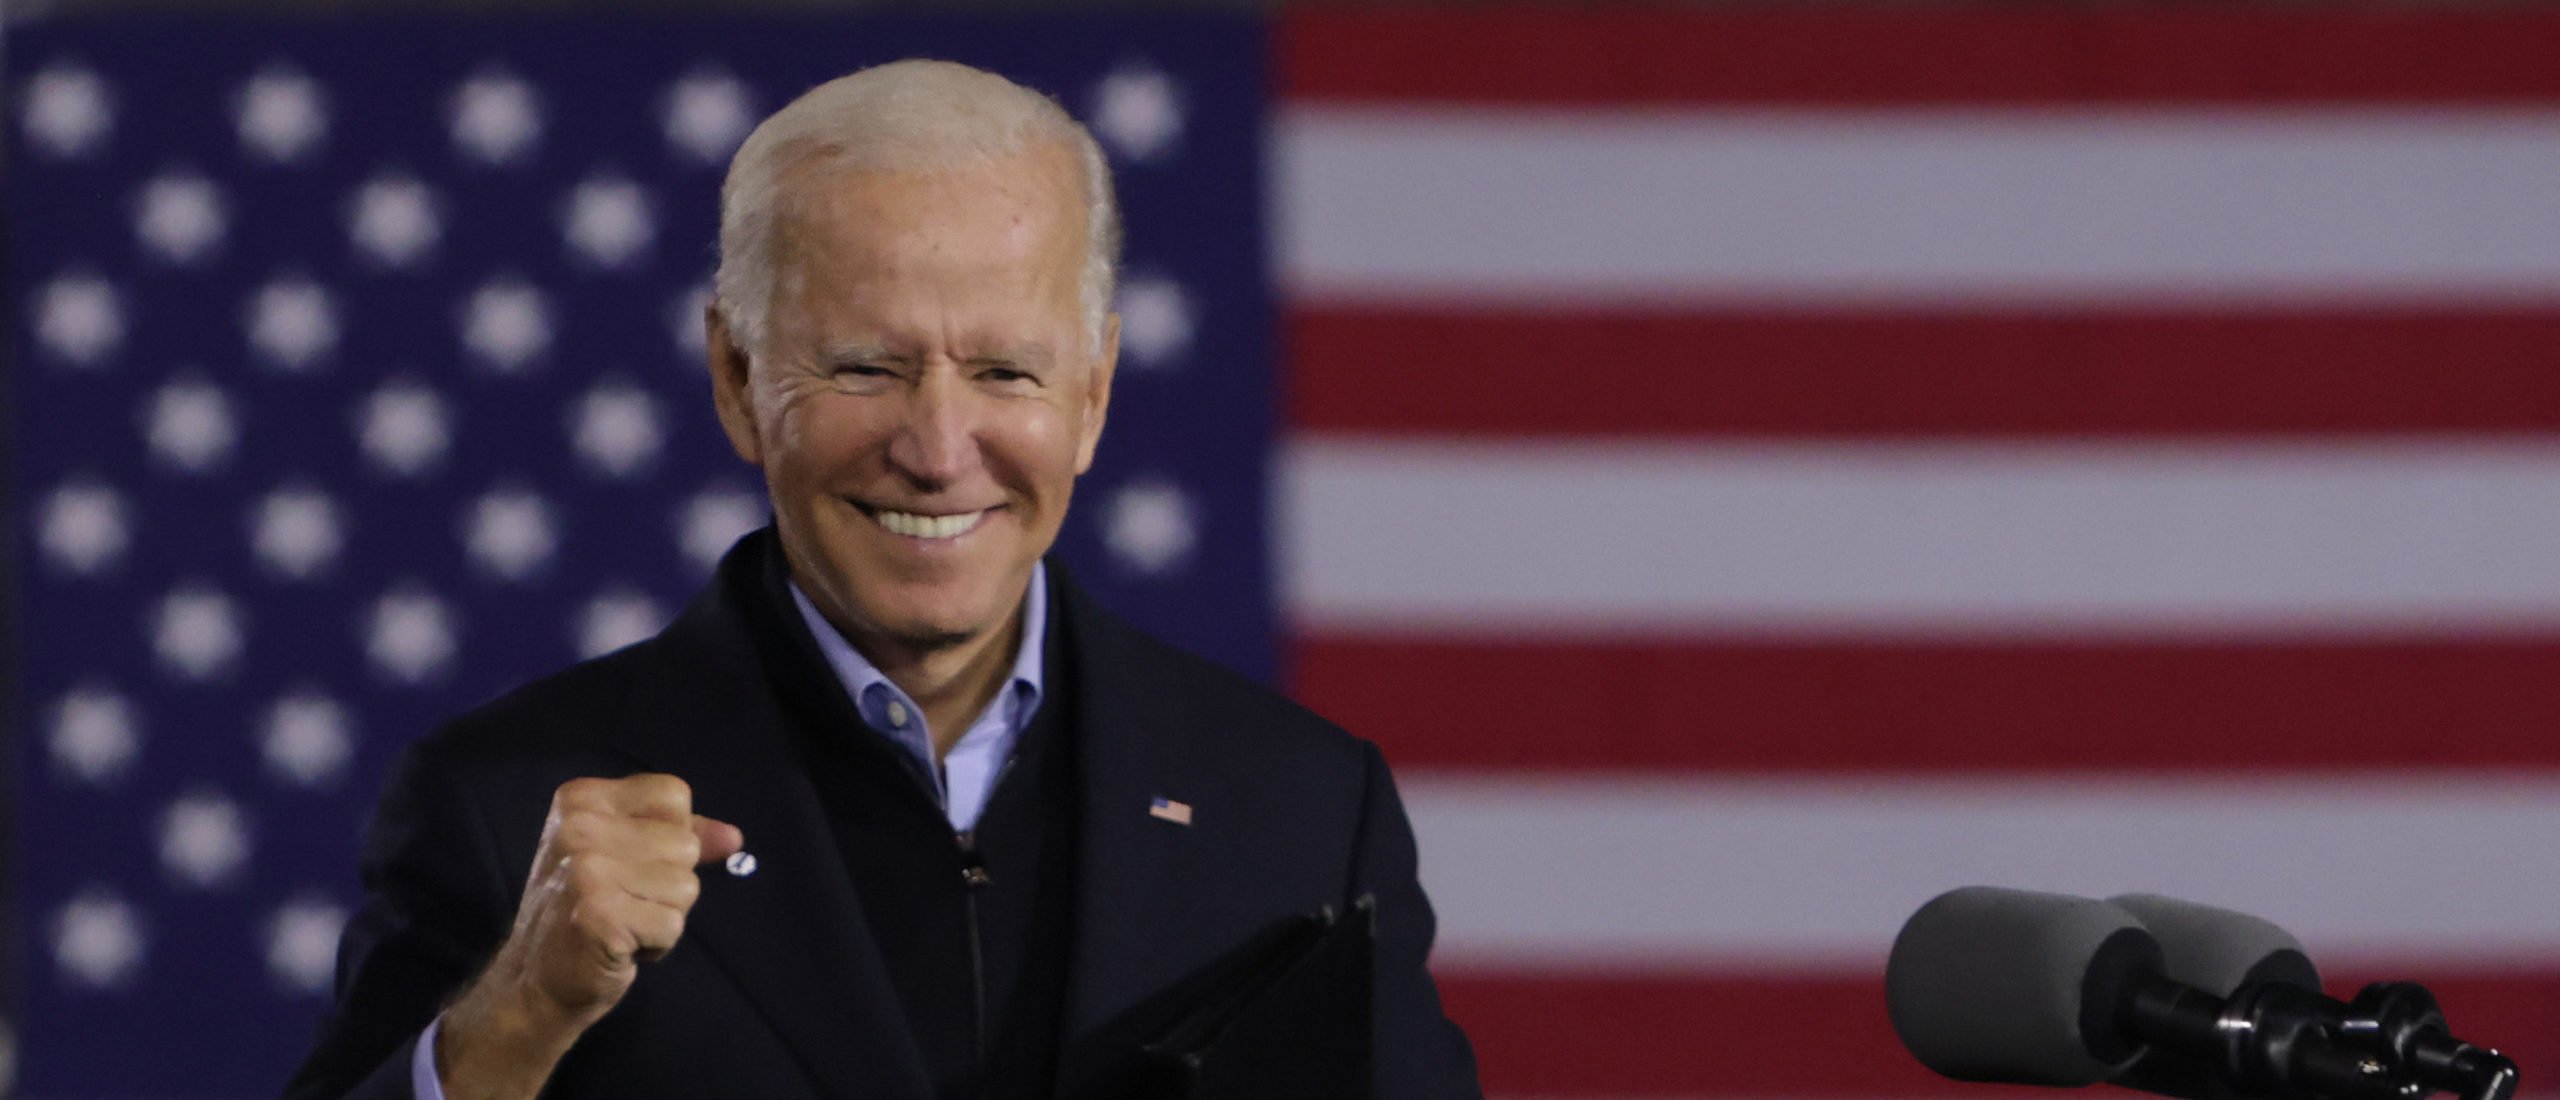 Biden Redefines Bipartisan To Include Laws Passed With No Republican Votes | The Daily Caller